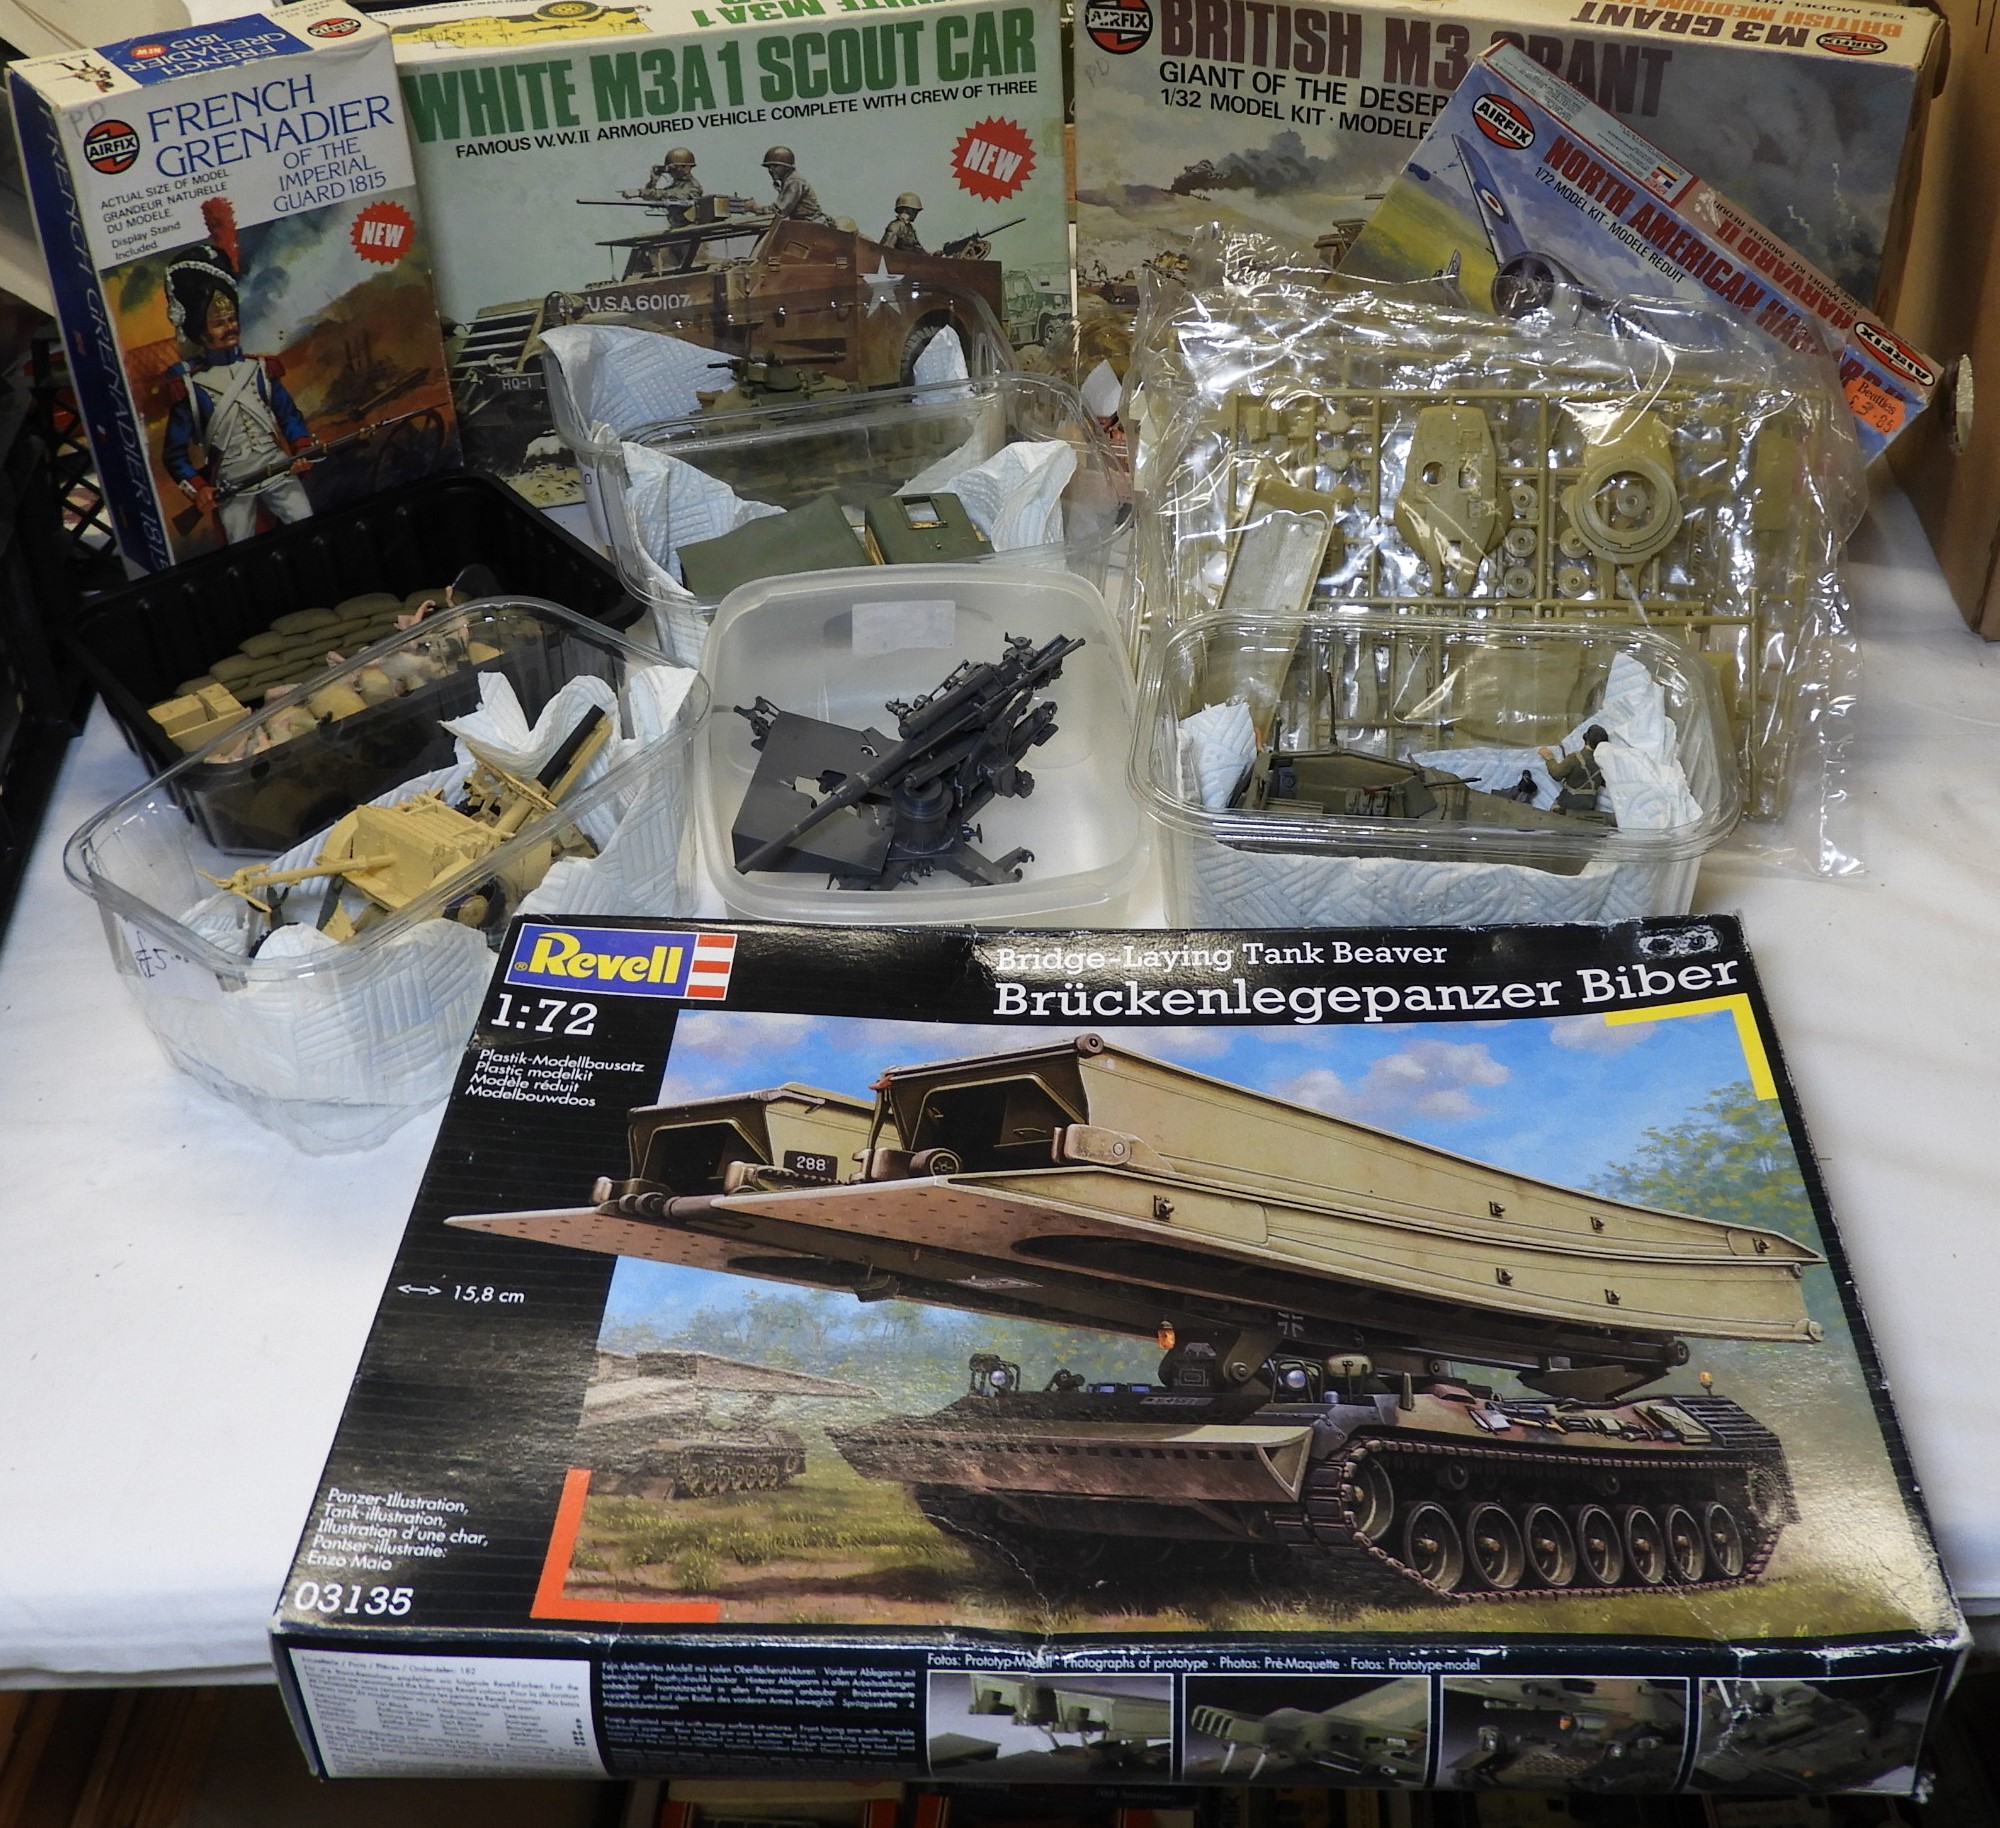 VARIOUS AIRFIX & OTHER MILITARY KIT MODELS